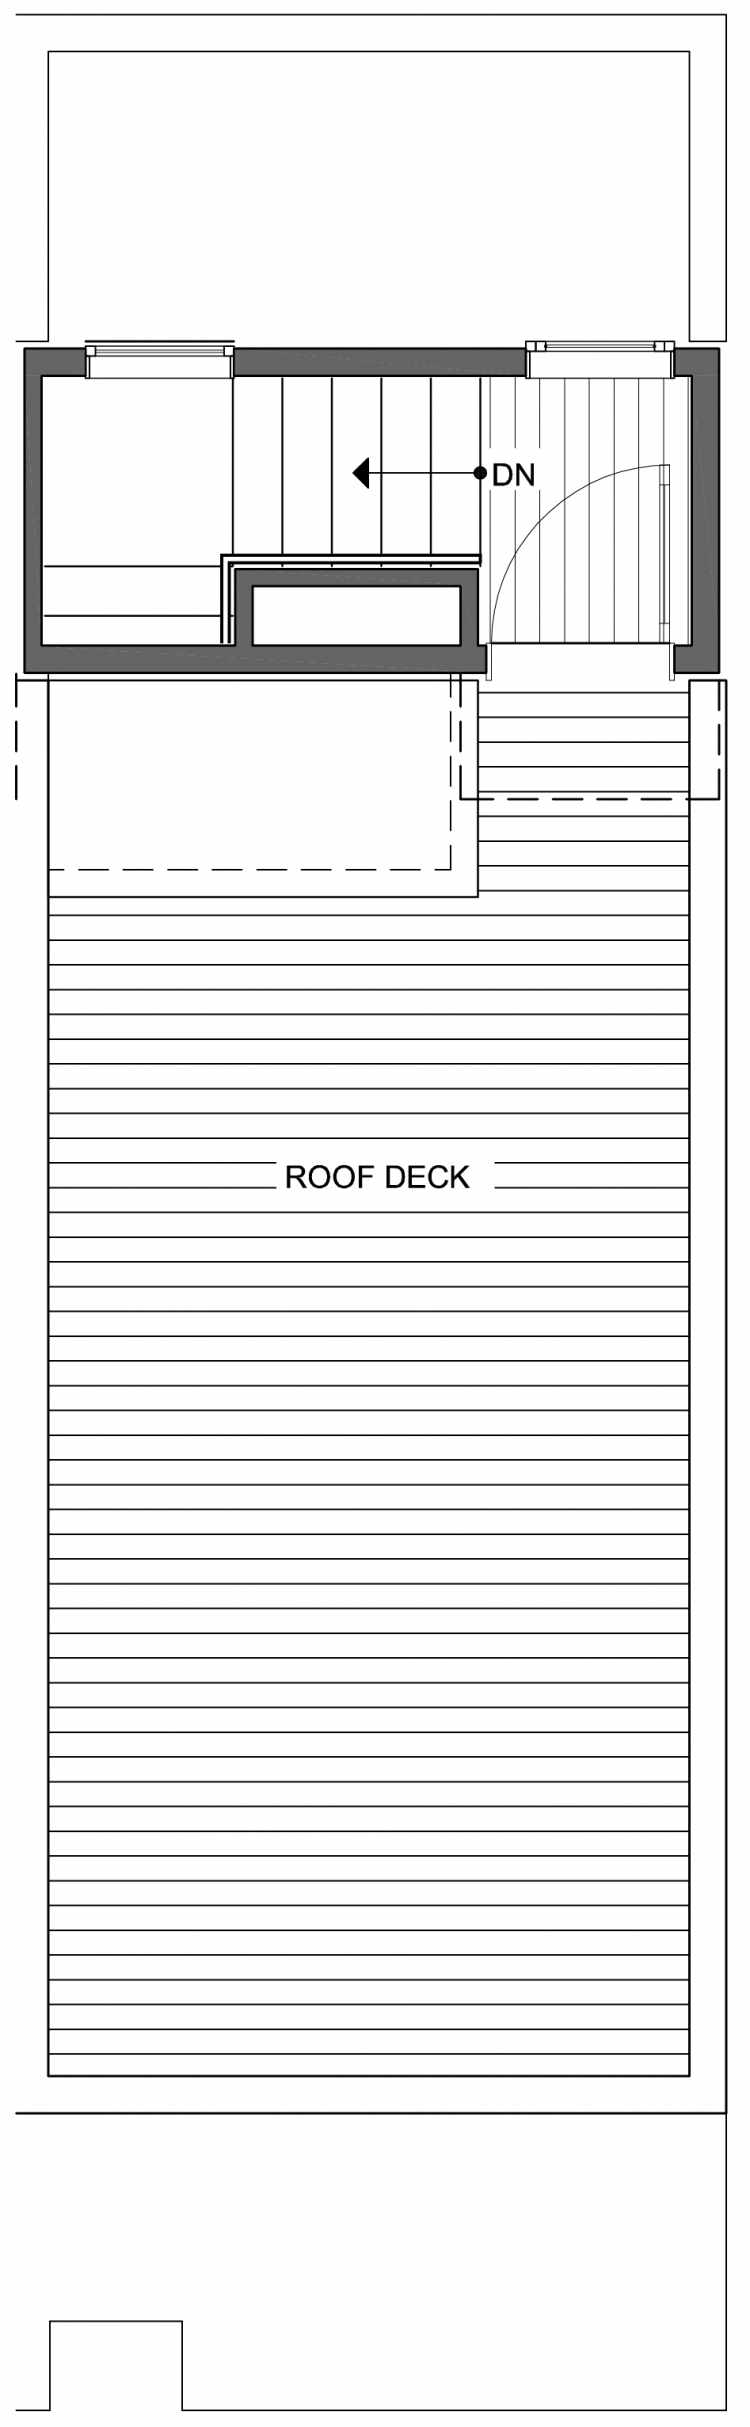 Roof Deck Floor Plan of 806G N 46th St, One of the Nino 15 East Townhomes by Isola Homes